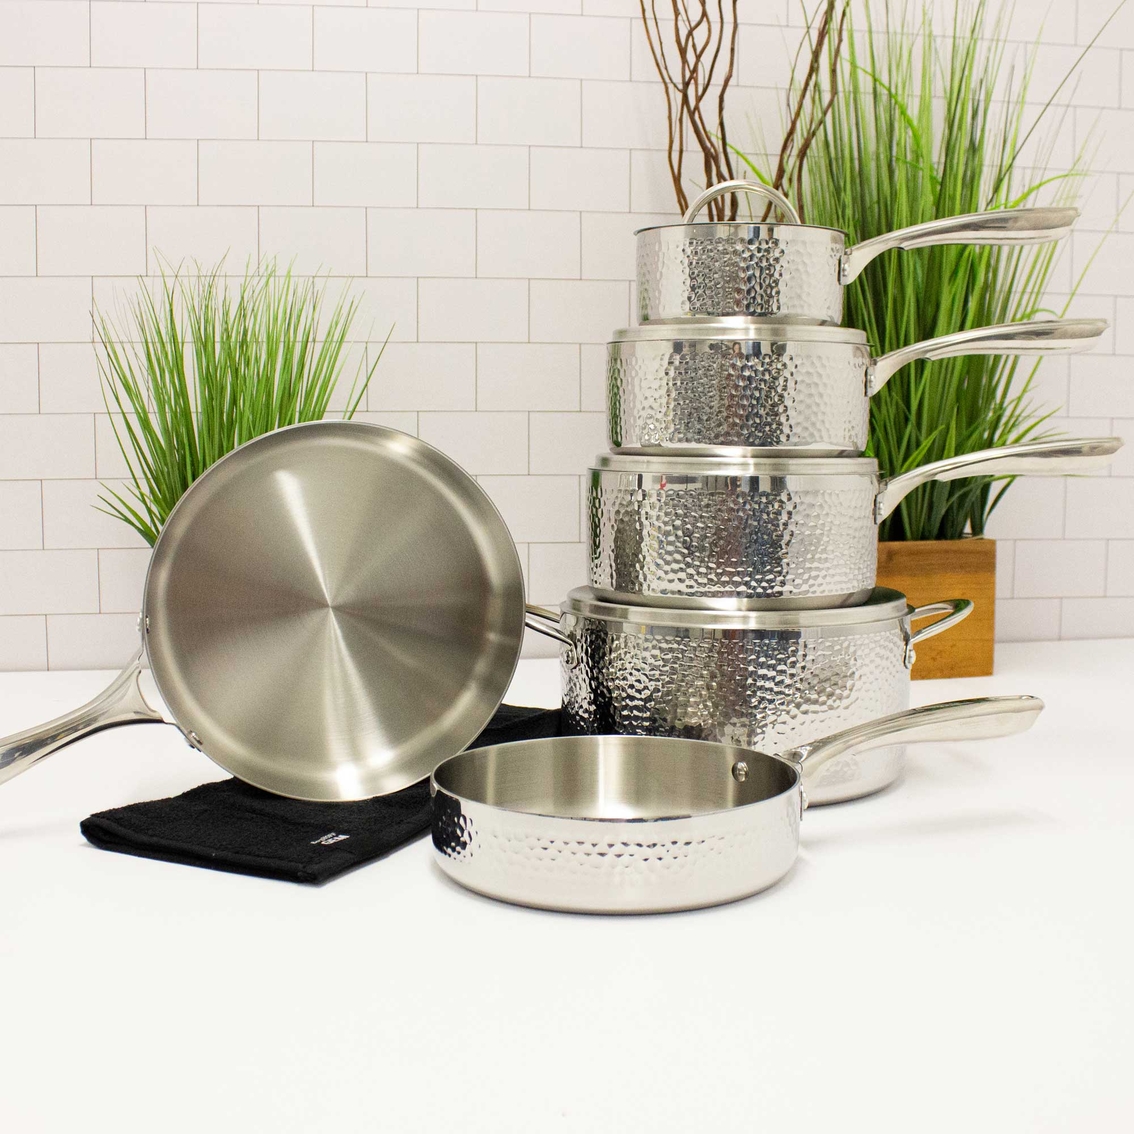 Berghoff's Vintage Hammered Tri Ply Stainless Steel Cookware 10 pc. Set - Image 10 of 10